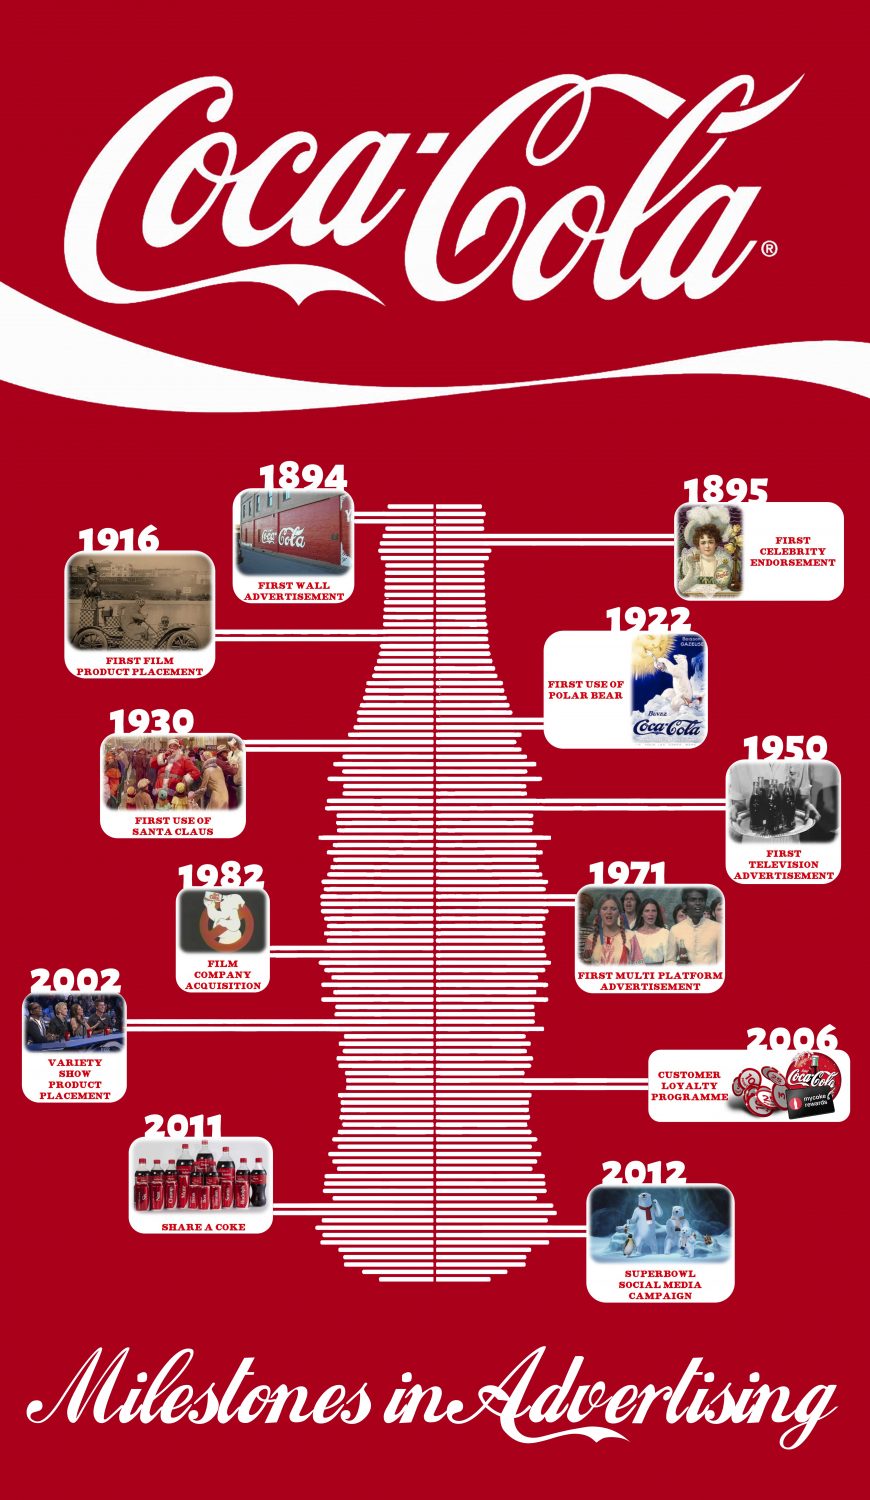 CocaCola A History of Advertising  Copywriting & Content Marketing